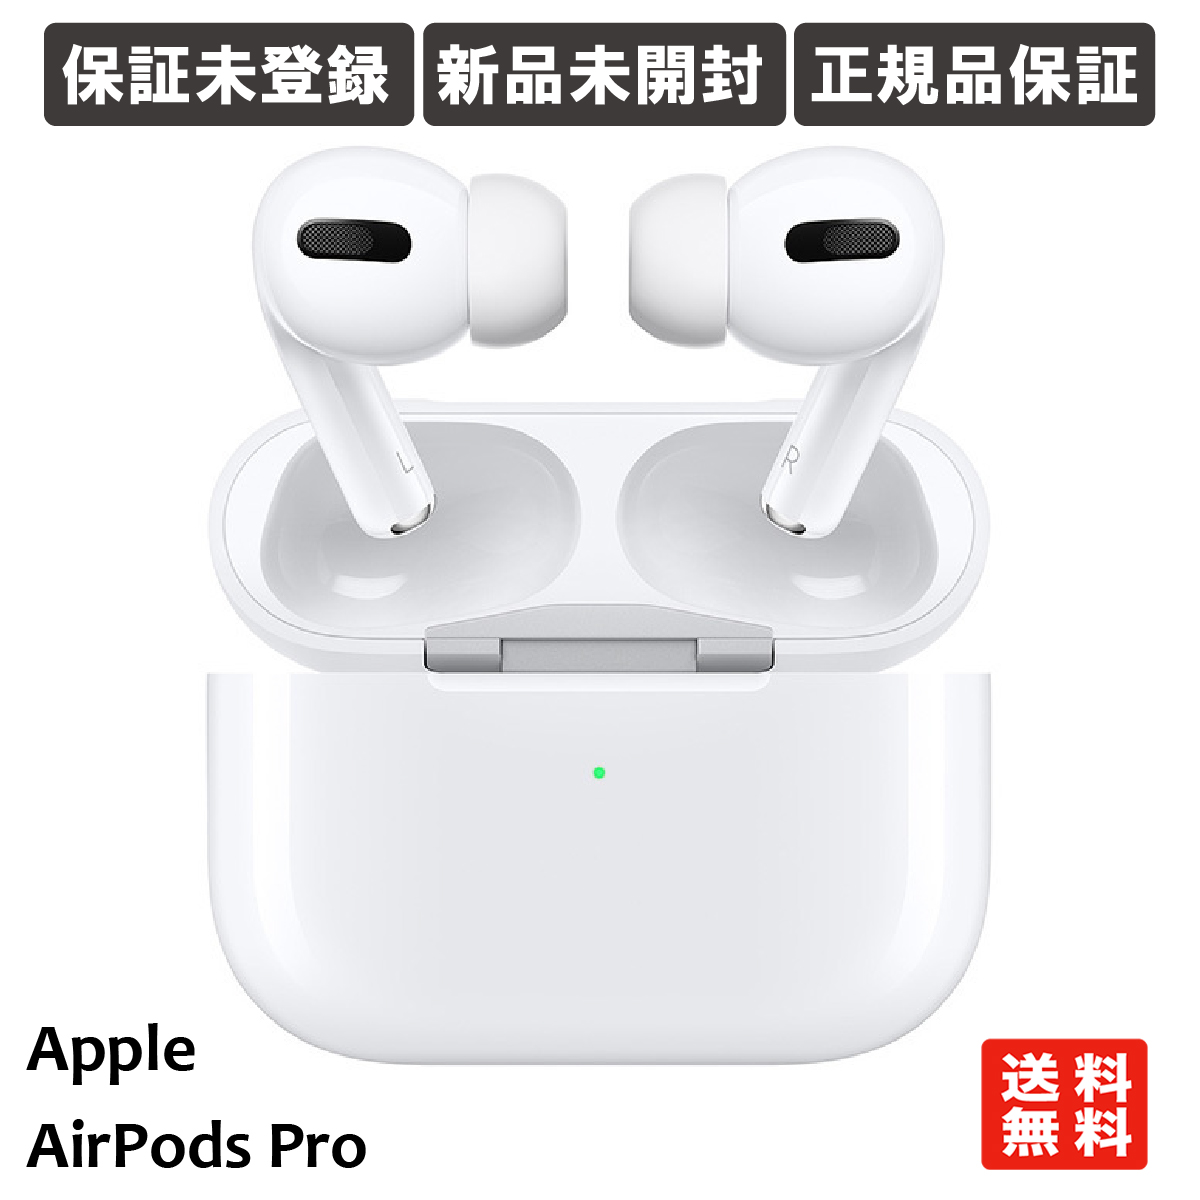 Sharaf DG Oman Pay Day Offers!!! Apple AirPods Pro Facebook, 48% OFF